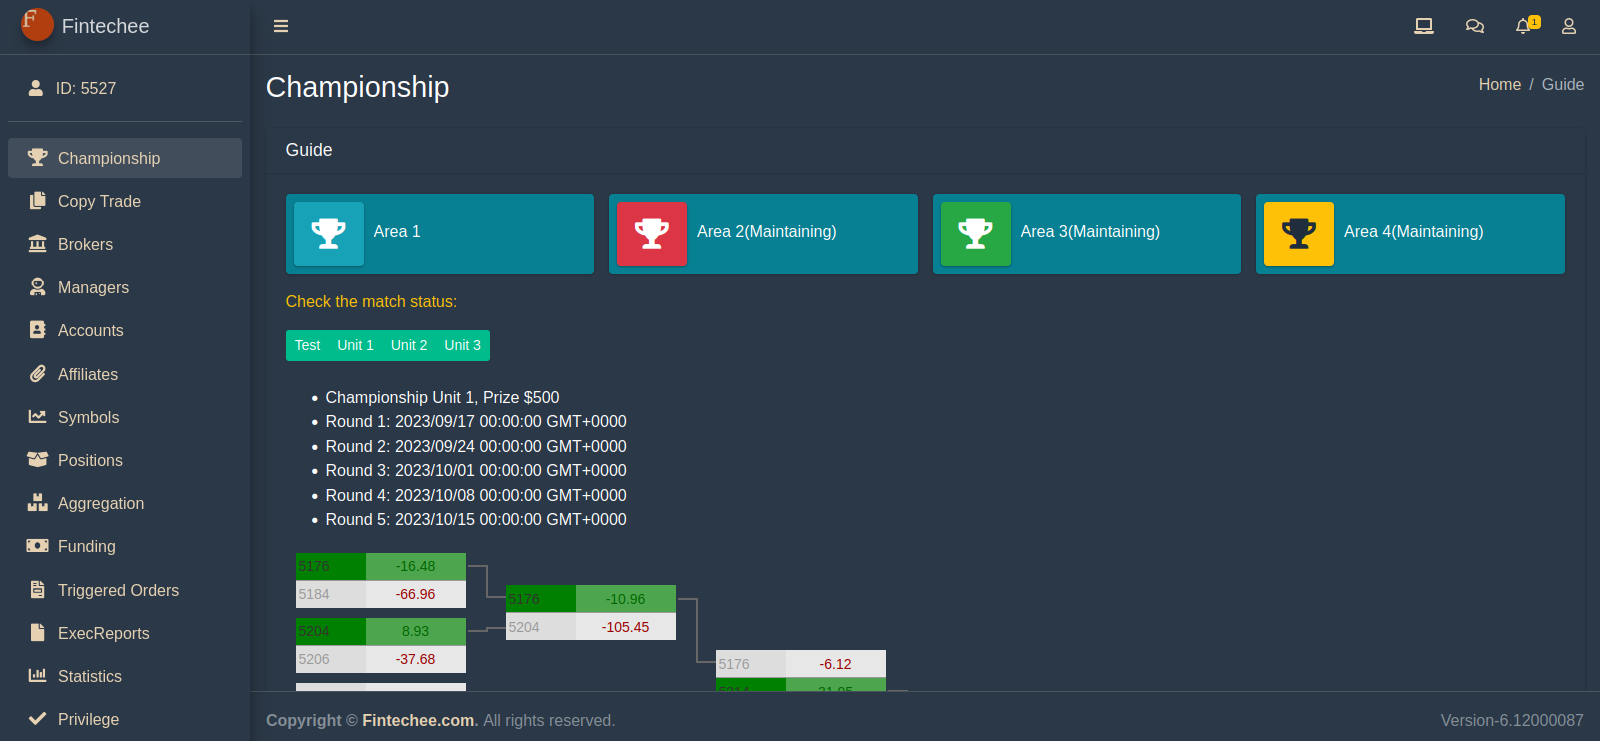 Fintechee: SDK trading includes algorithms for trading. Automated trading is based on it with RESTful API and JS API